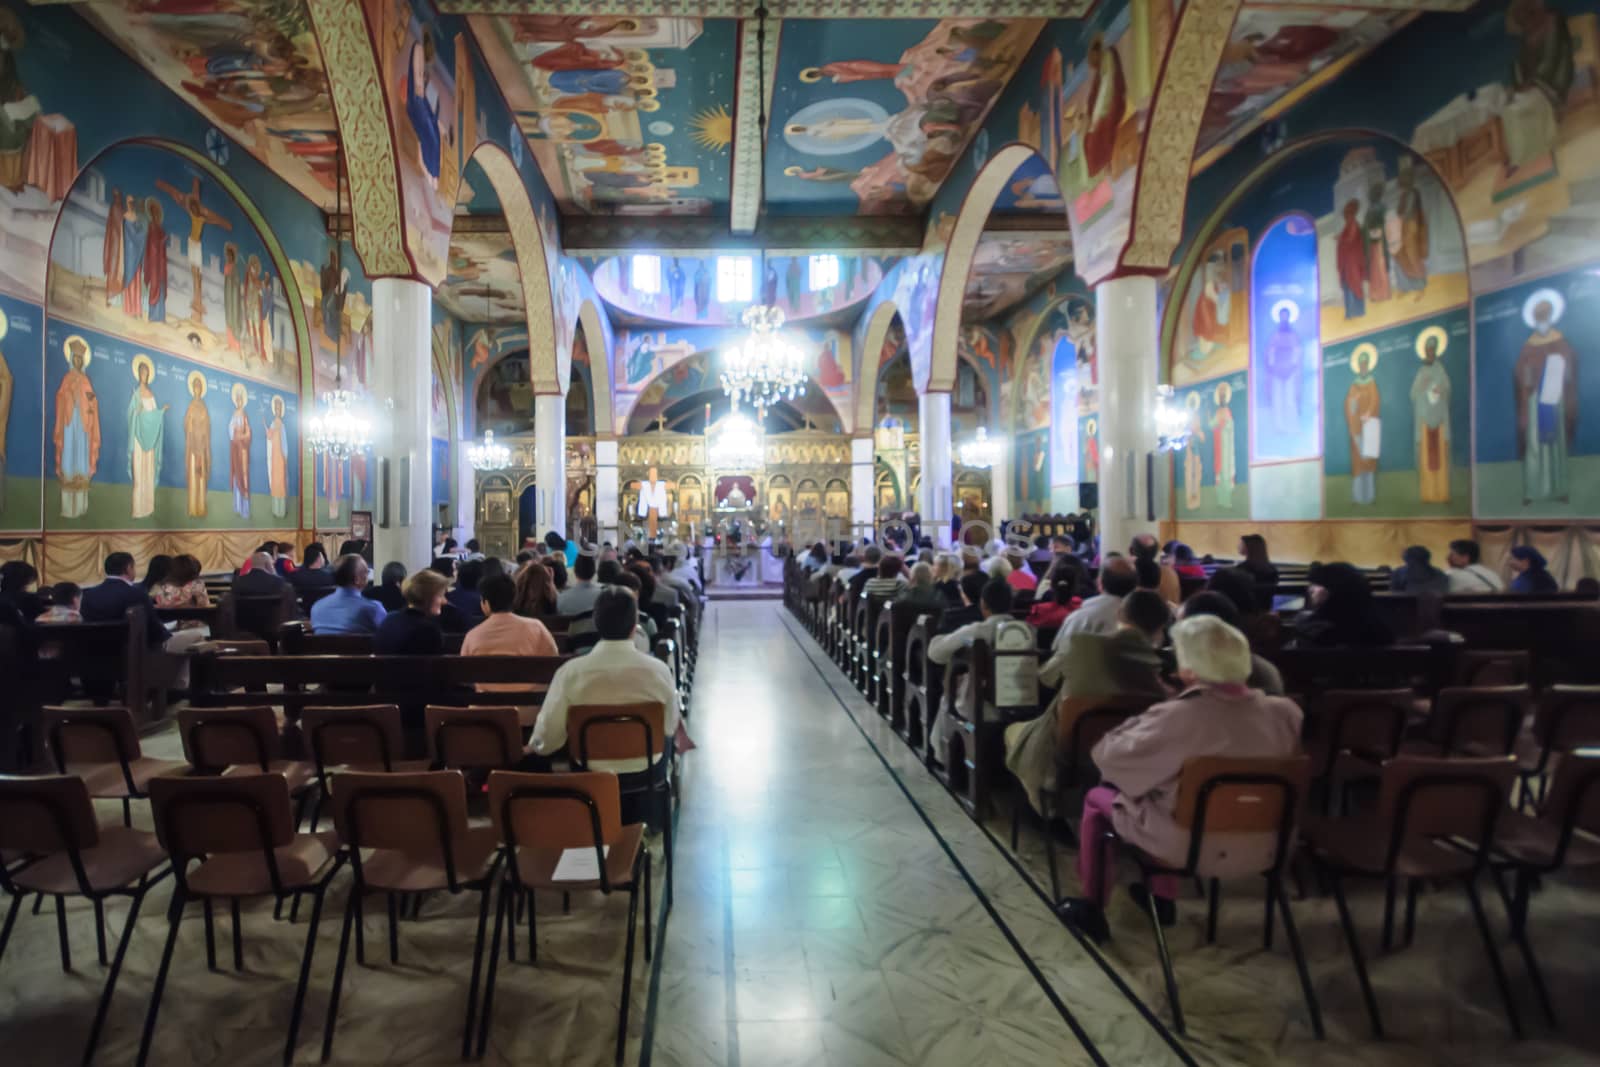 JERUSALEM - APRIL 18, 2014: The church of the Greek Catholic Patriarchate, on Good Friday, in the old city of Jerusalem, Israel